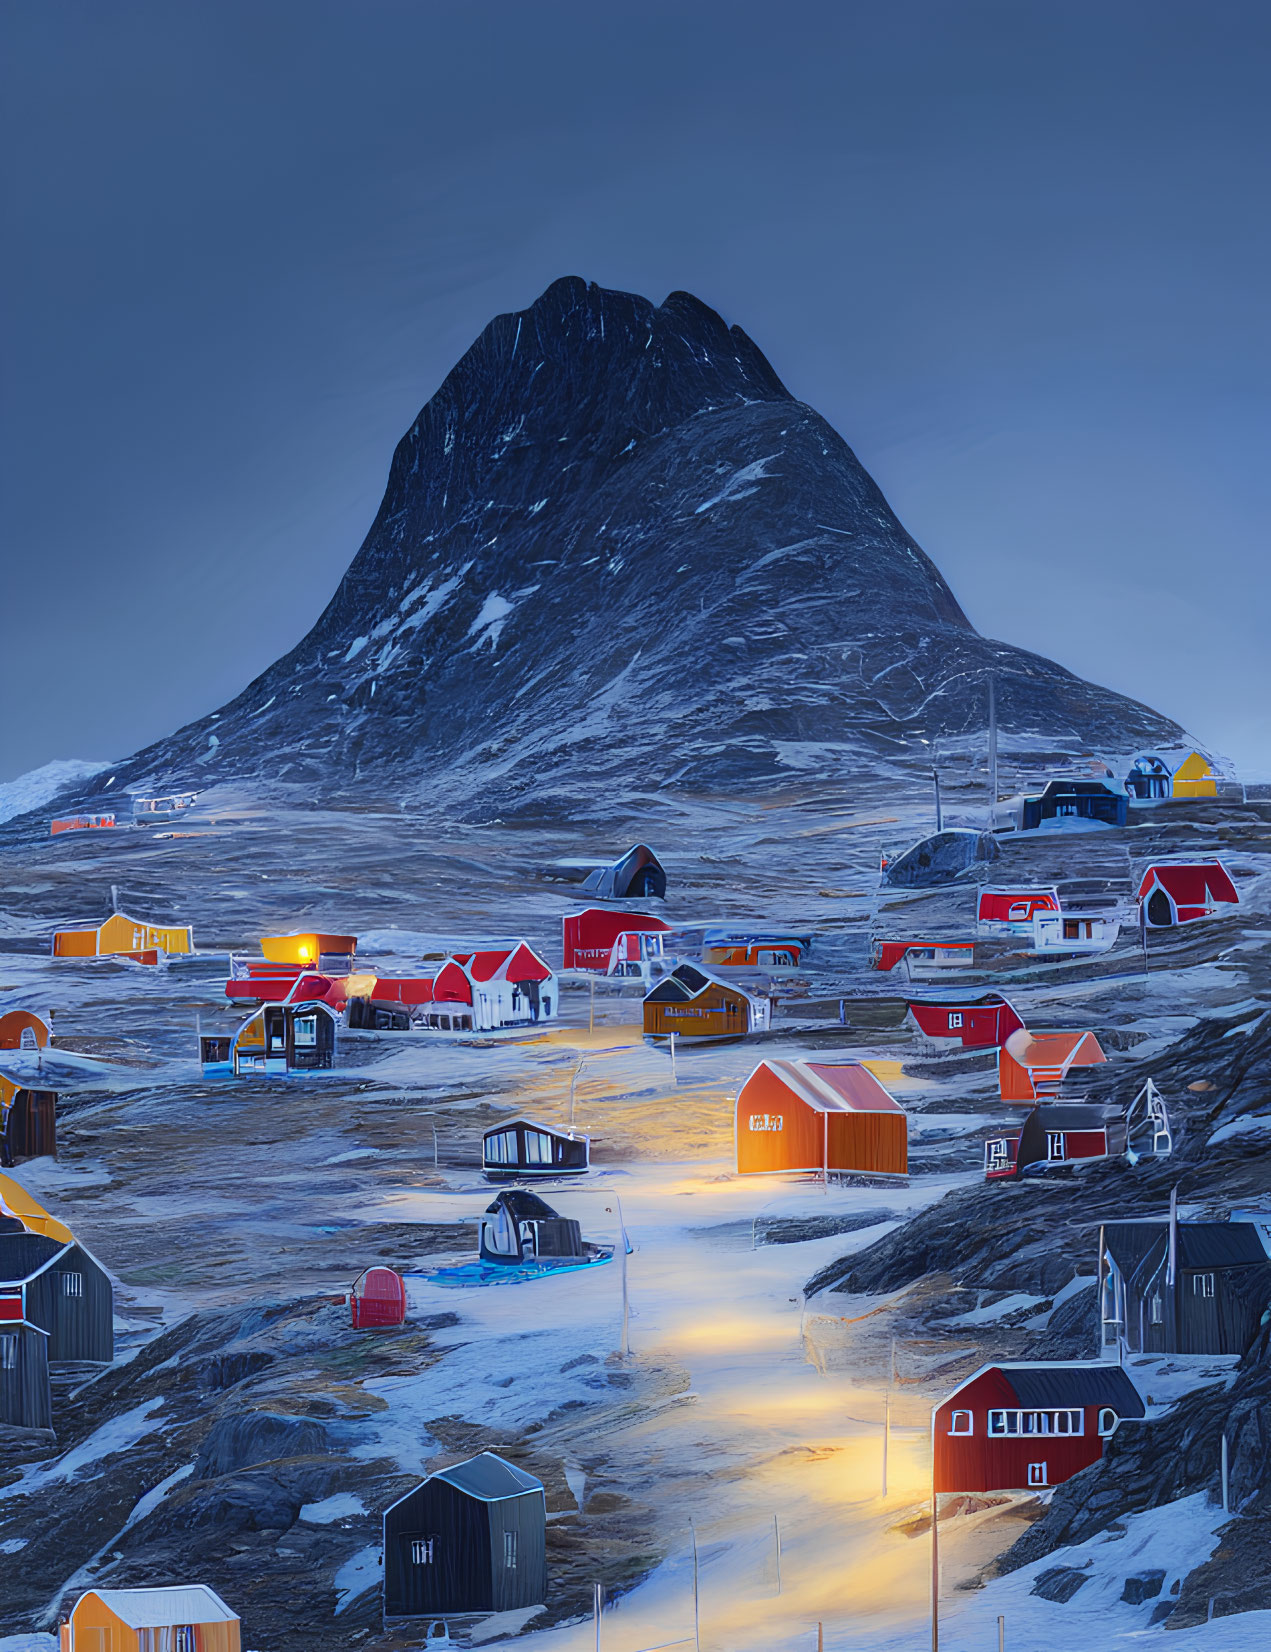 Scenic Arctic village with colorful houses under towering mountain at dusk